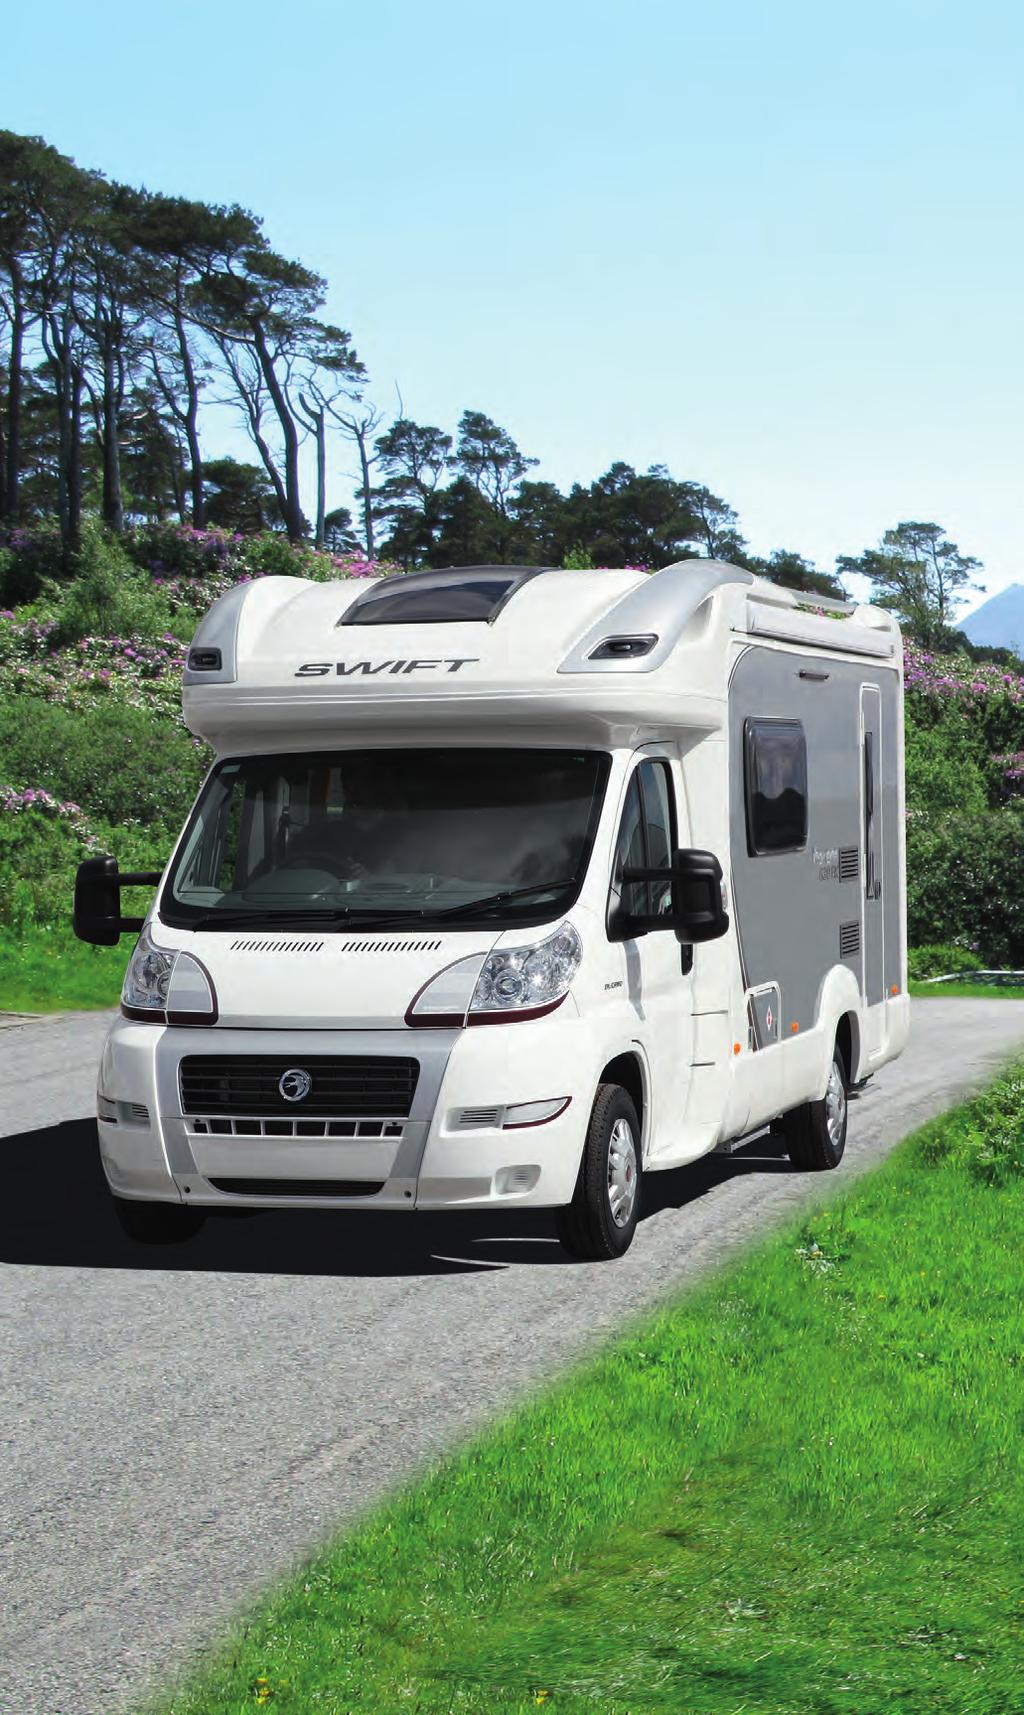 Motorhomes Swift Group Limited provides a three-year warranty on the coachbuilt element of the motorhome, see www.swiftmotorhomes.co.uk for more details.